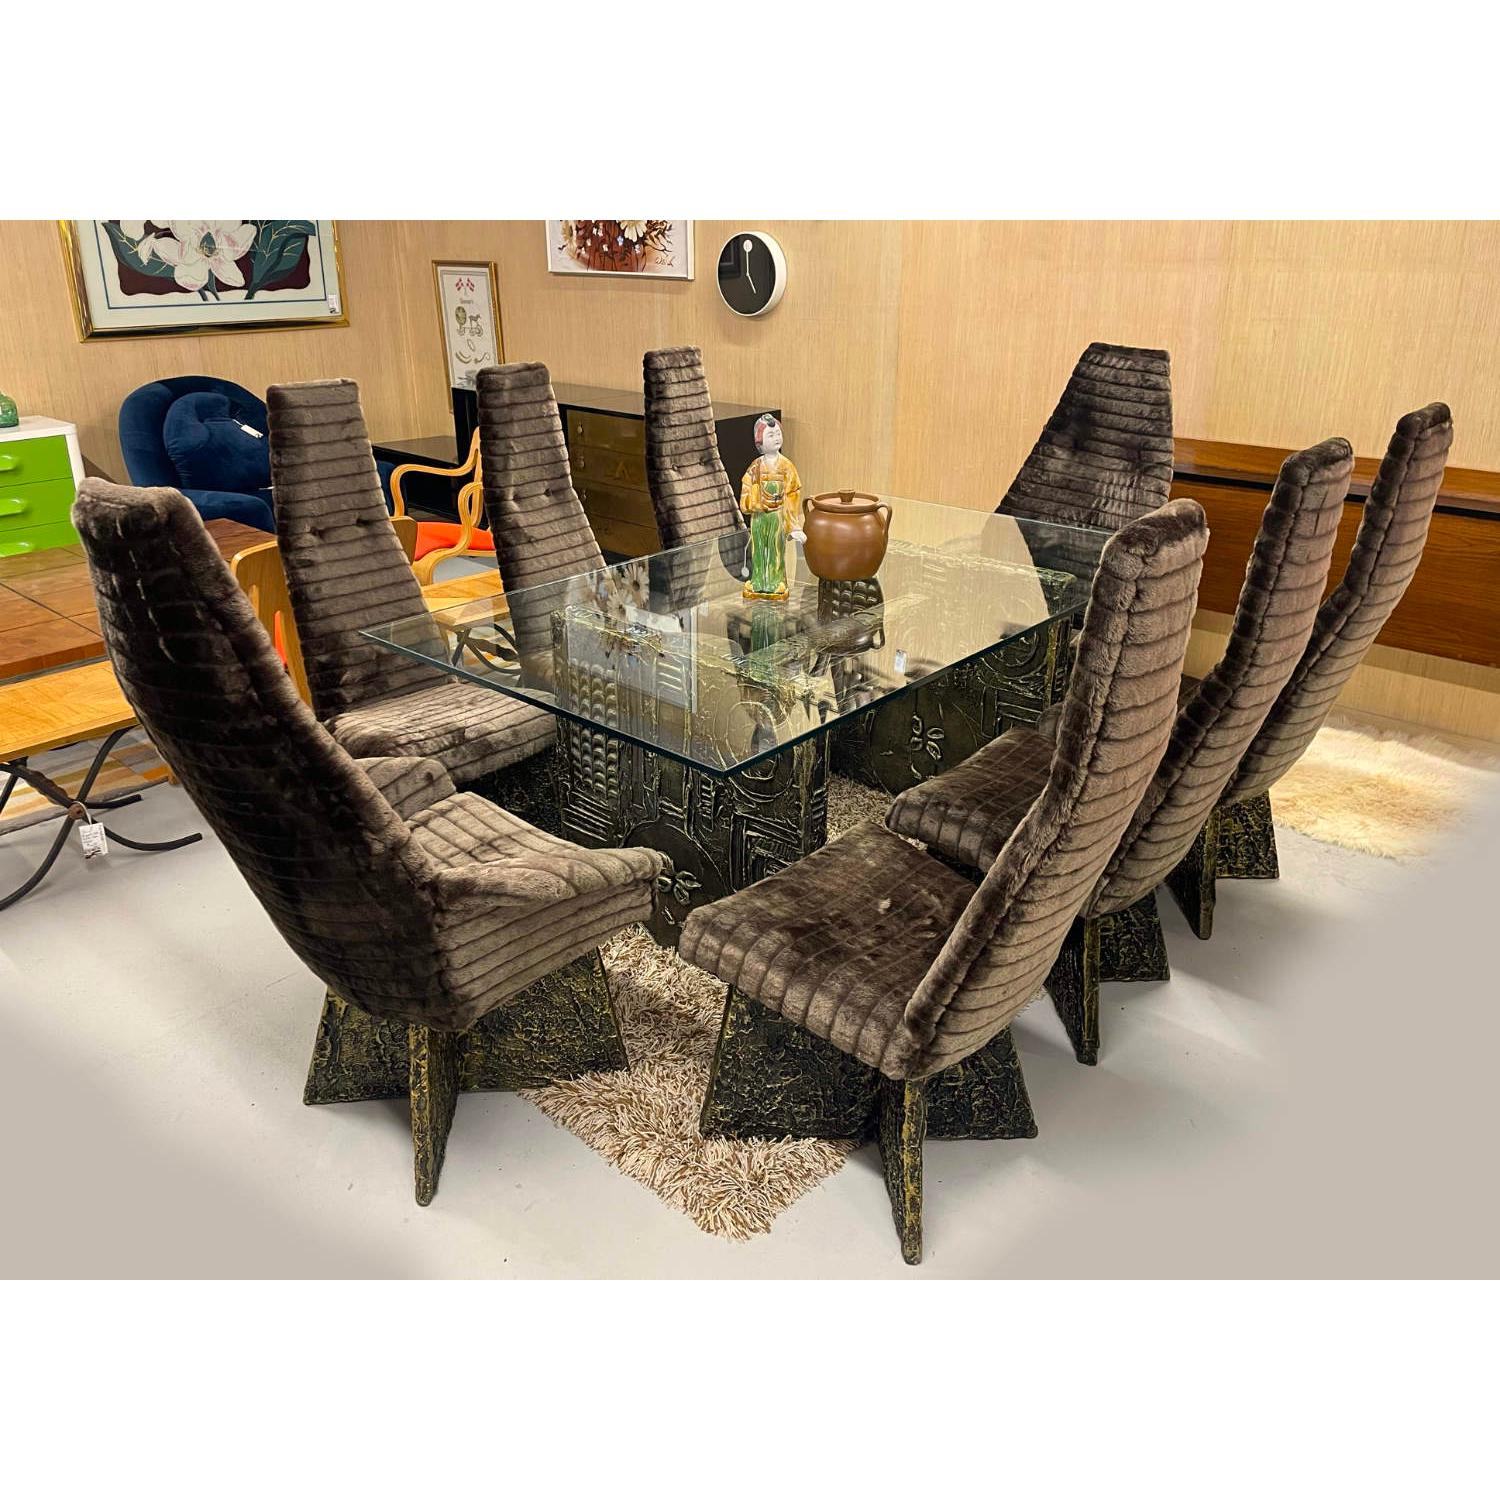 This listing is for the group of 8 chairs. The matching table is sold separately.

You won't find a nicer (or larger) restored set of these Adrian Pearsall Brutalist Dining Chairs anywhere.  The FMV restoration team covets this unique line and